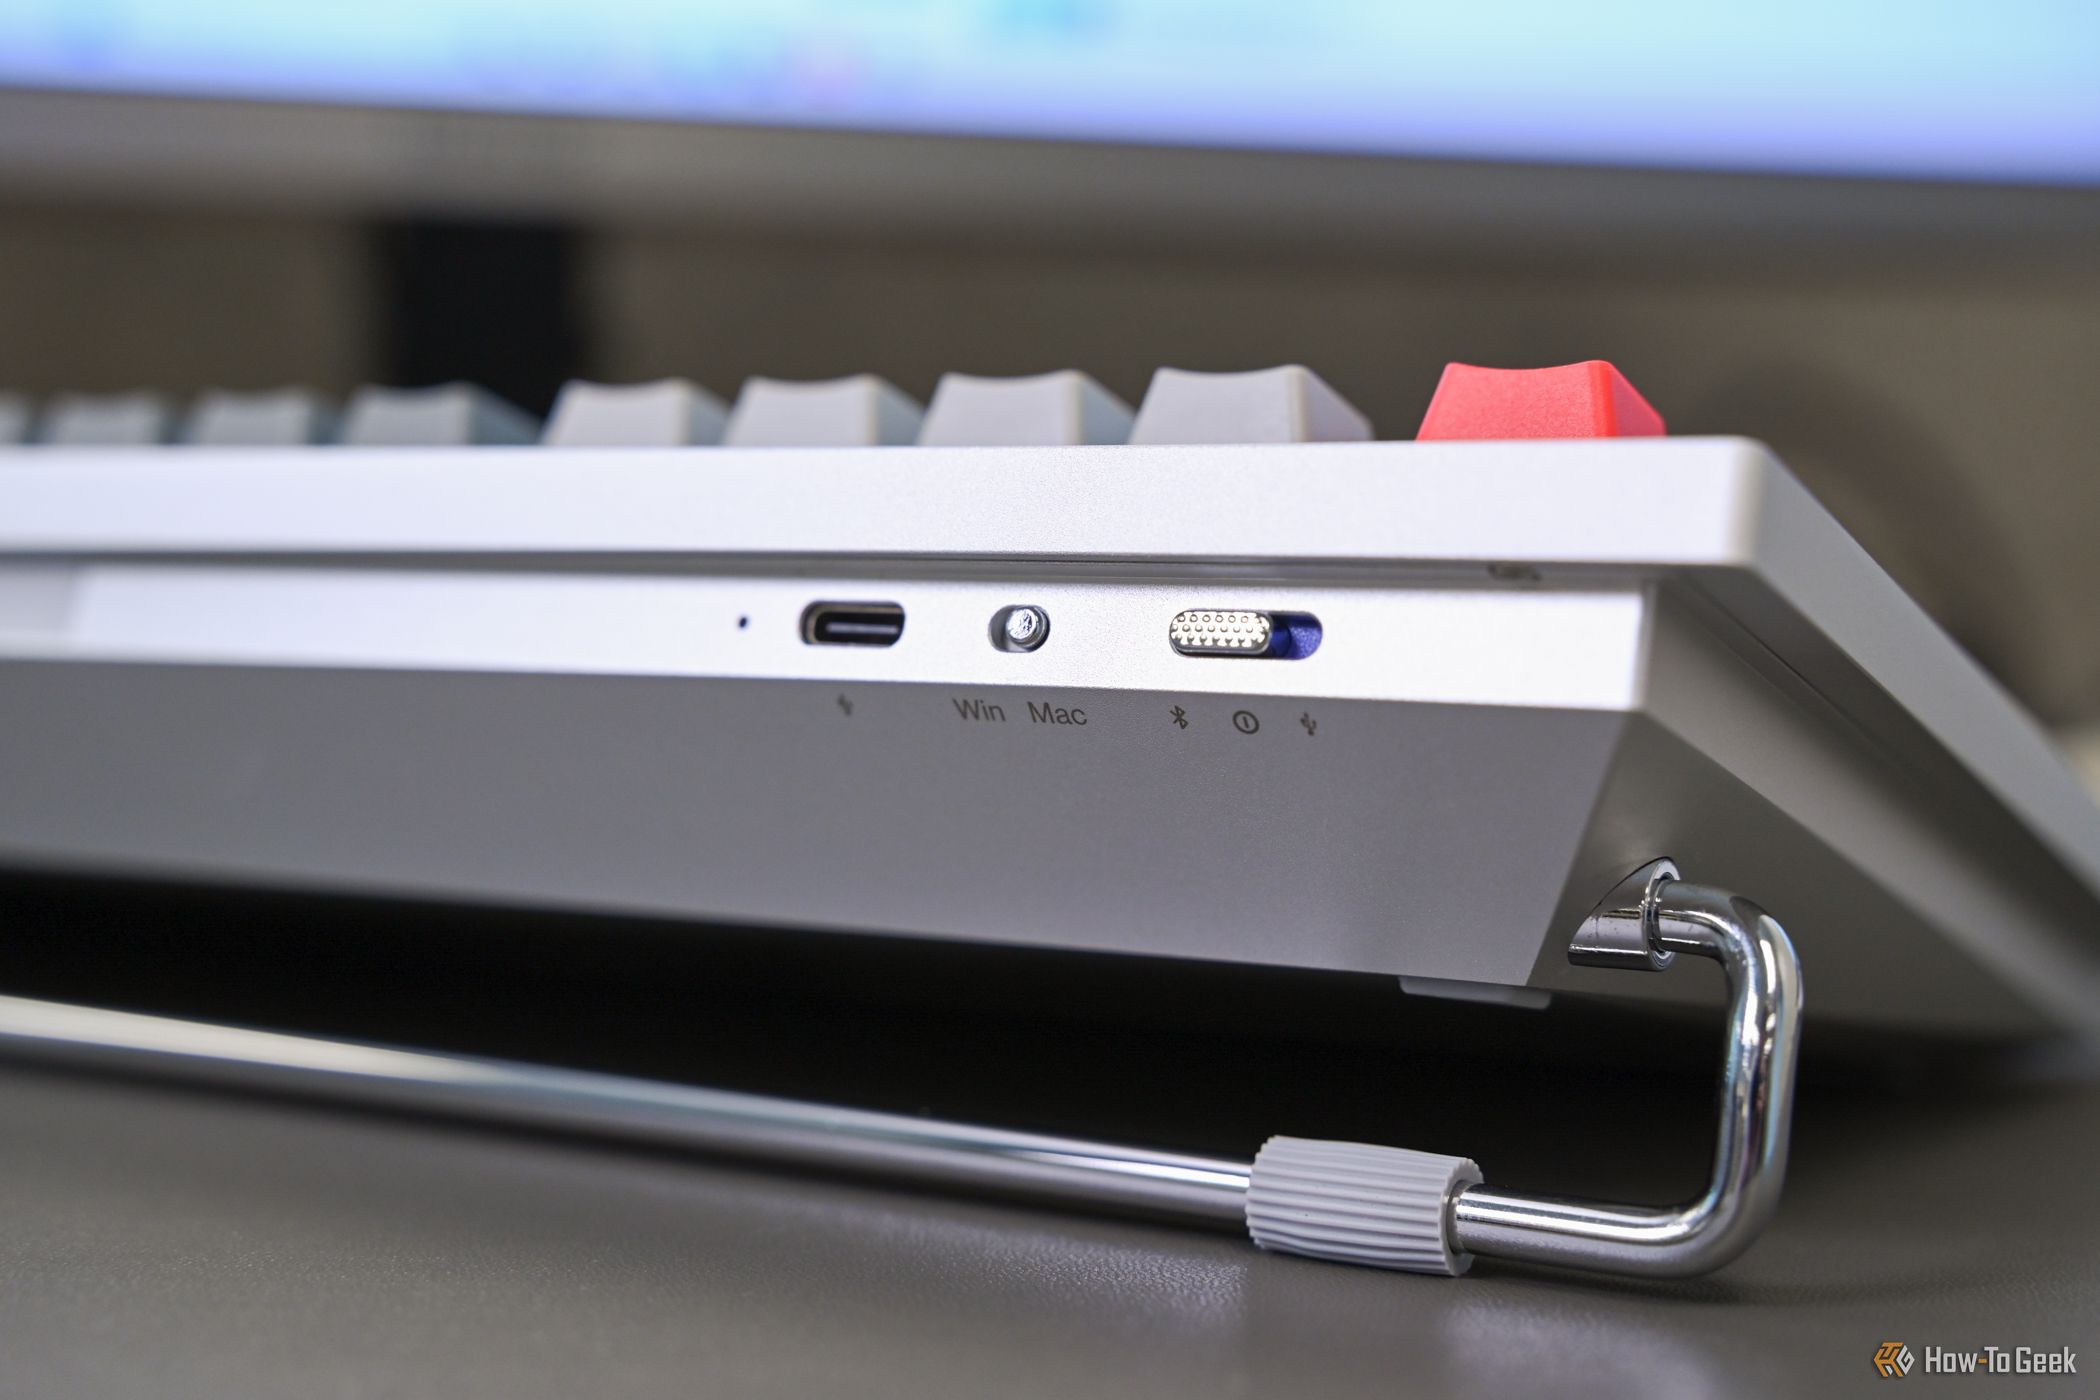 Showing the back of the OnePlus Keyboard 81 Pro with connection switch